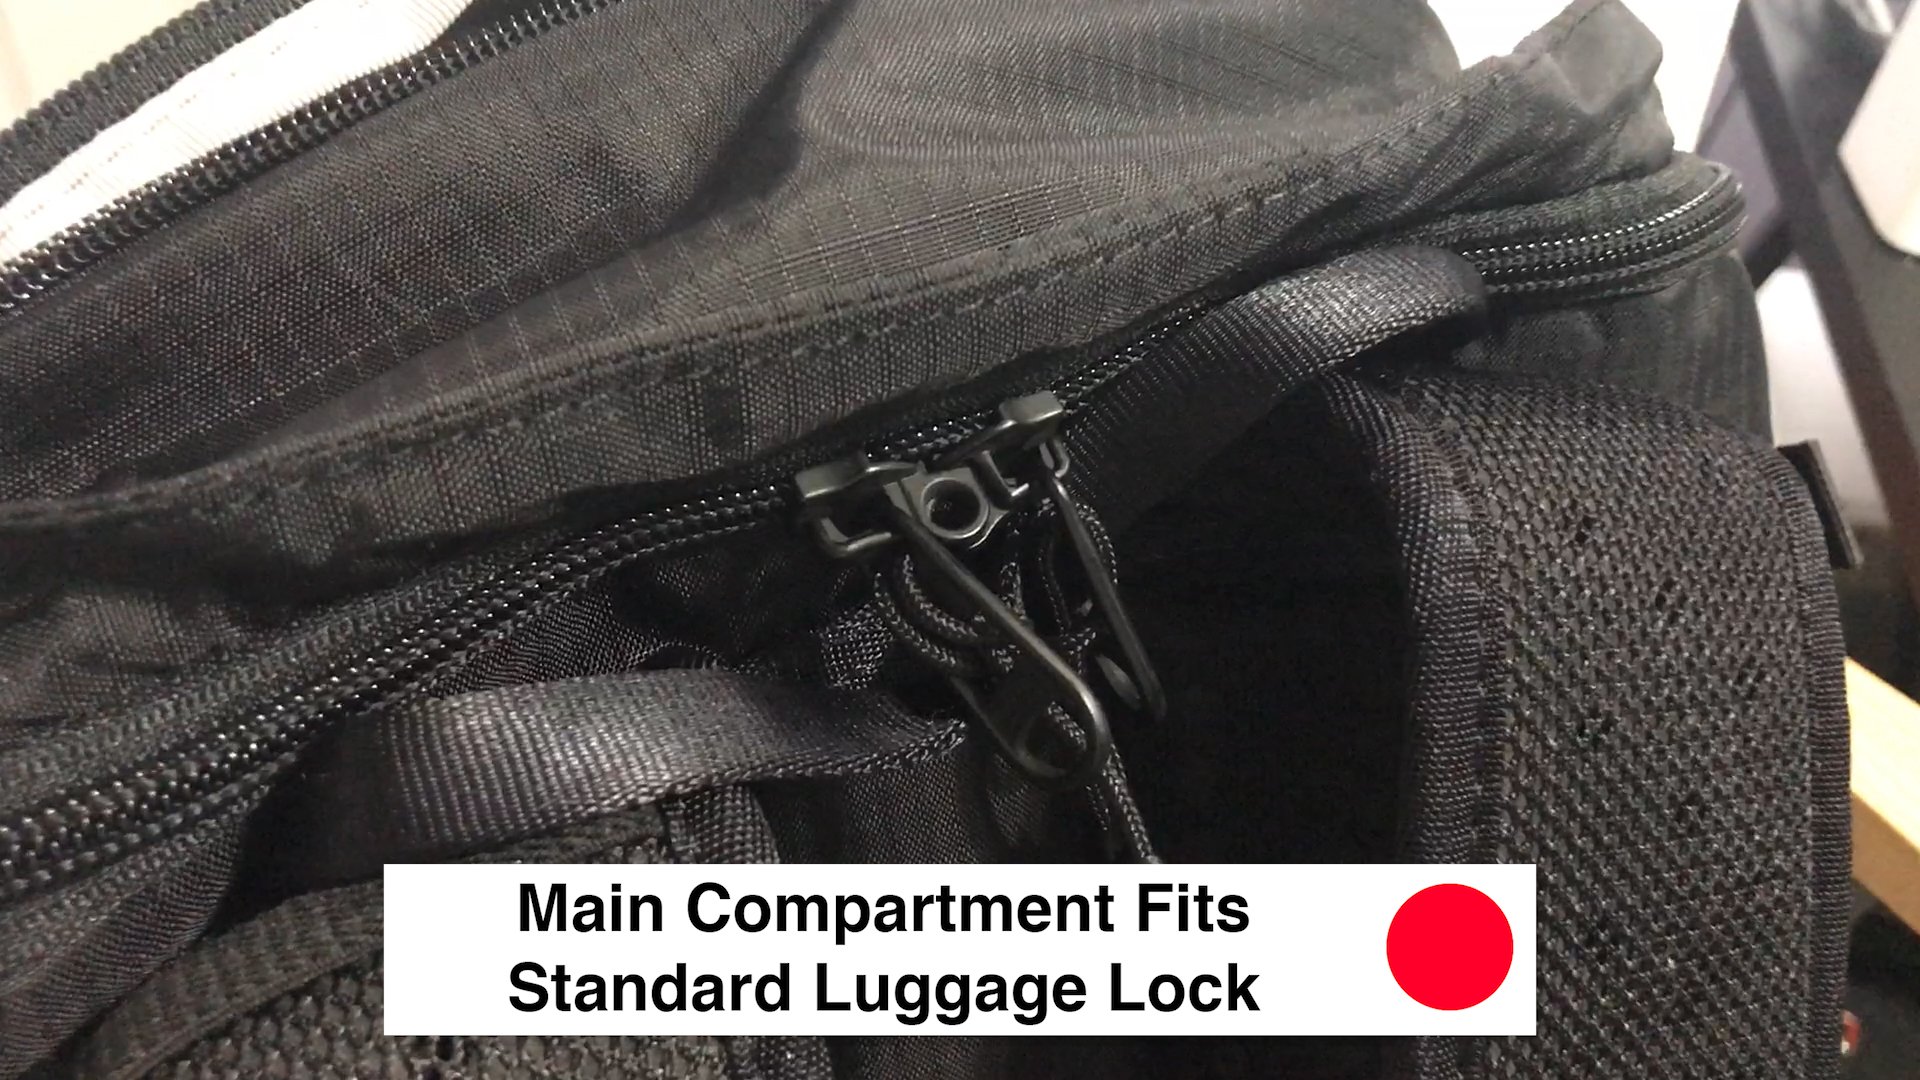 Main Compartment Fits Standard Luggage Lock - Pacsafe Venturesafe X30 Travel Pack - Black Anti Theft Backpack